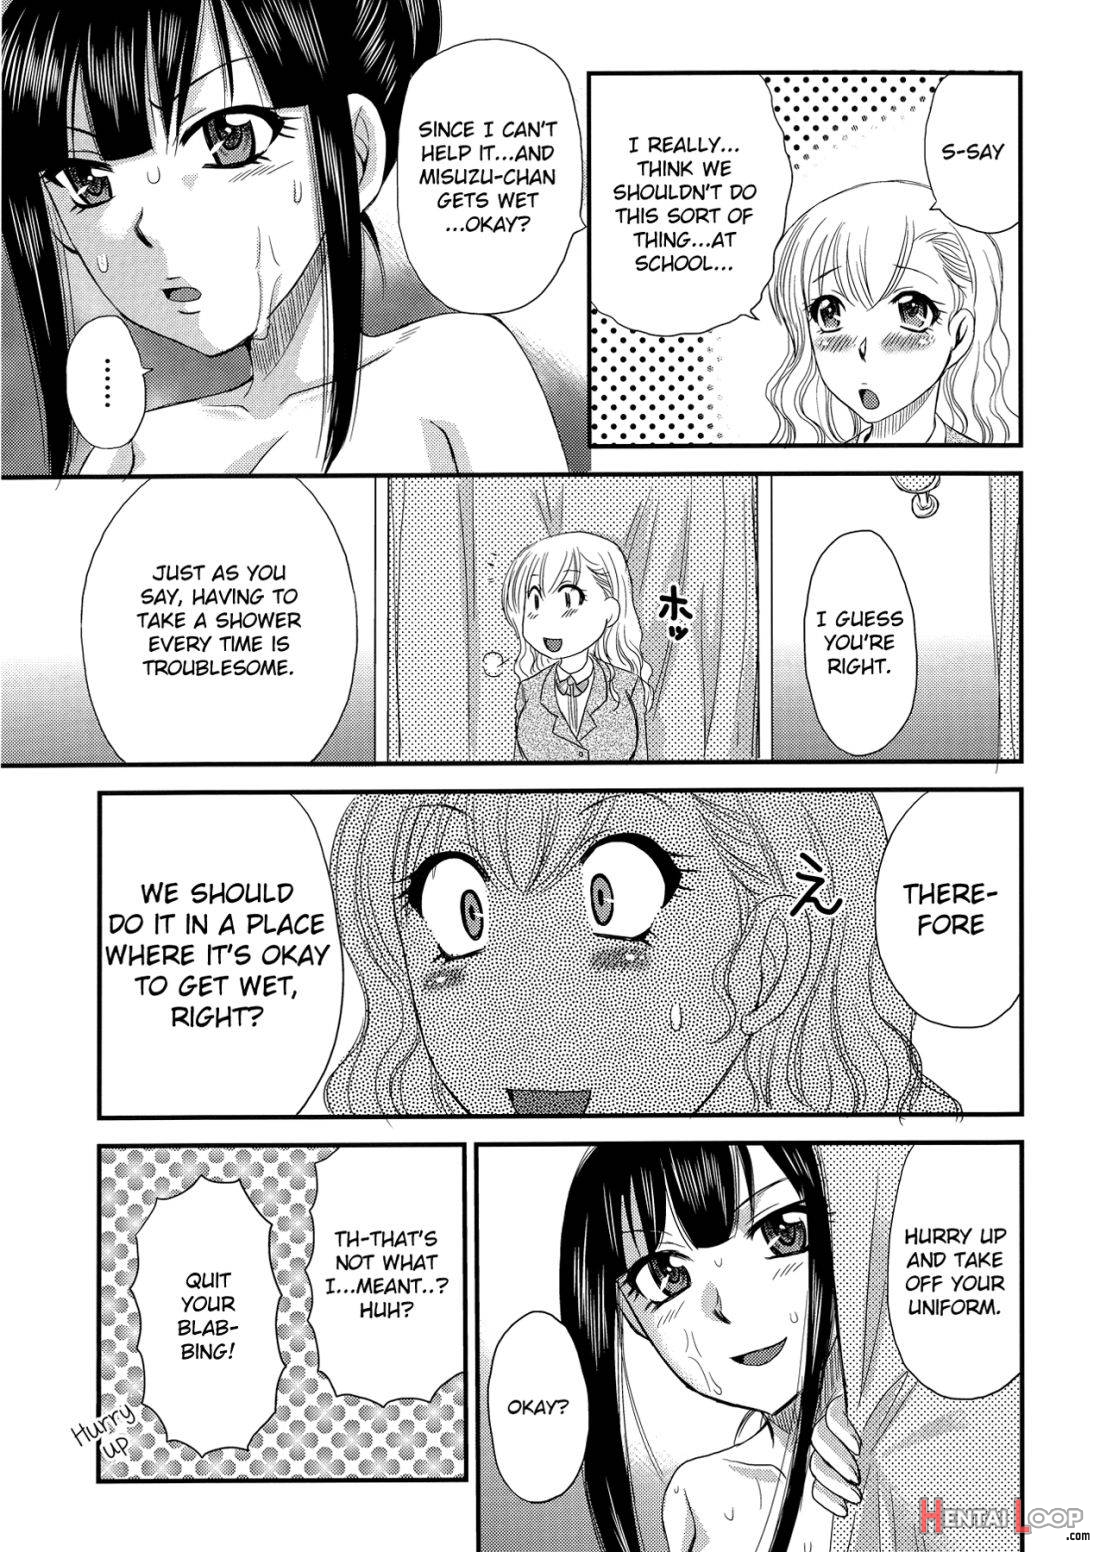 Selfish Top And Airheaded Bottom's Yuri Smut 2 page 4